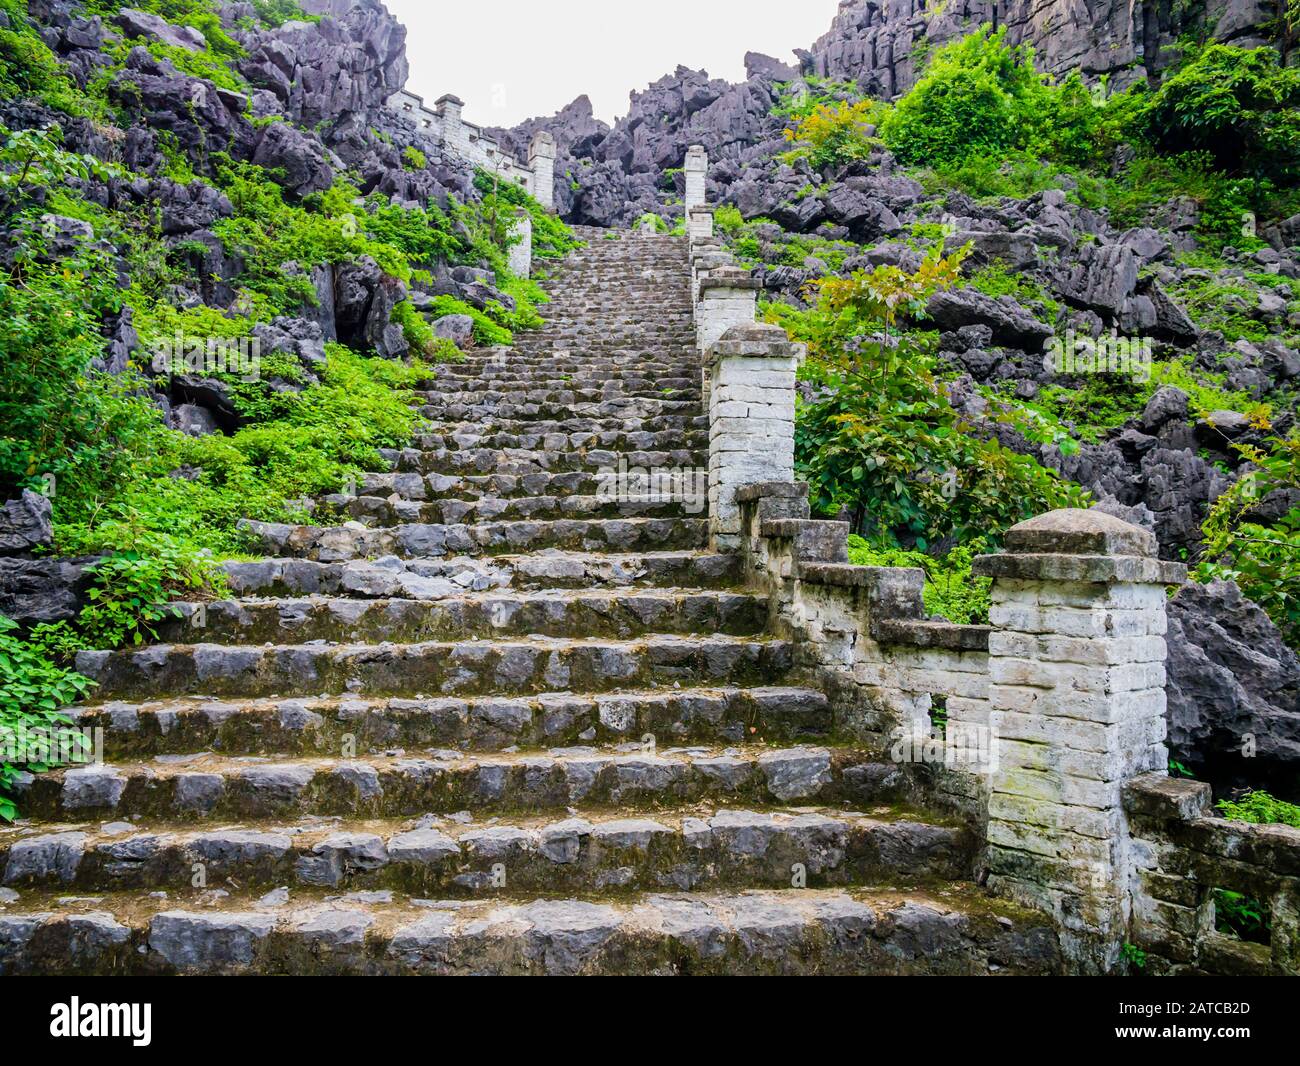 Stone staircase ascending the lying dragon mountain to reach the Hang Mua pagoda, one of the most beautifiul viewpoint in Ninh Binh, Vietnam Stock Photo